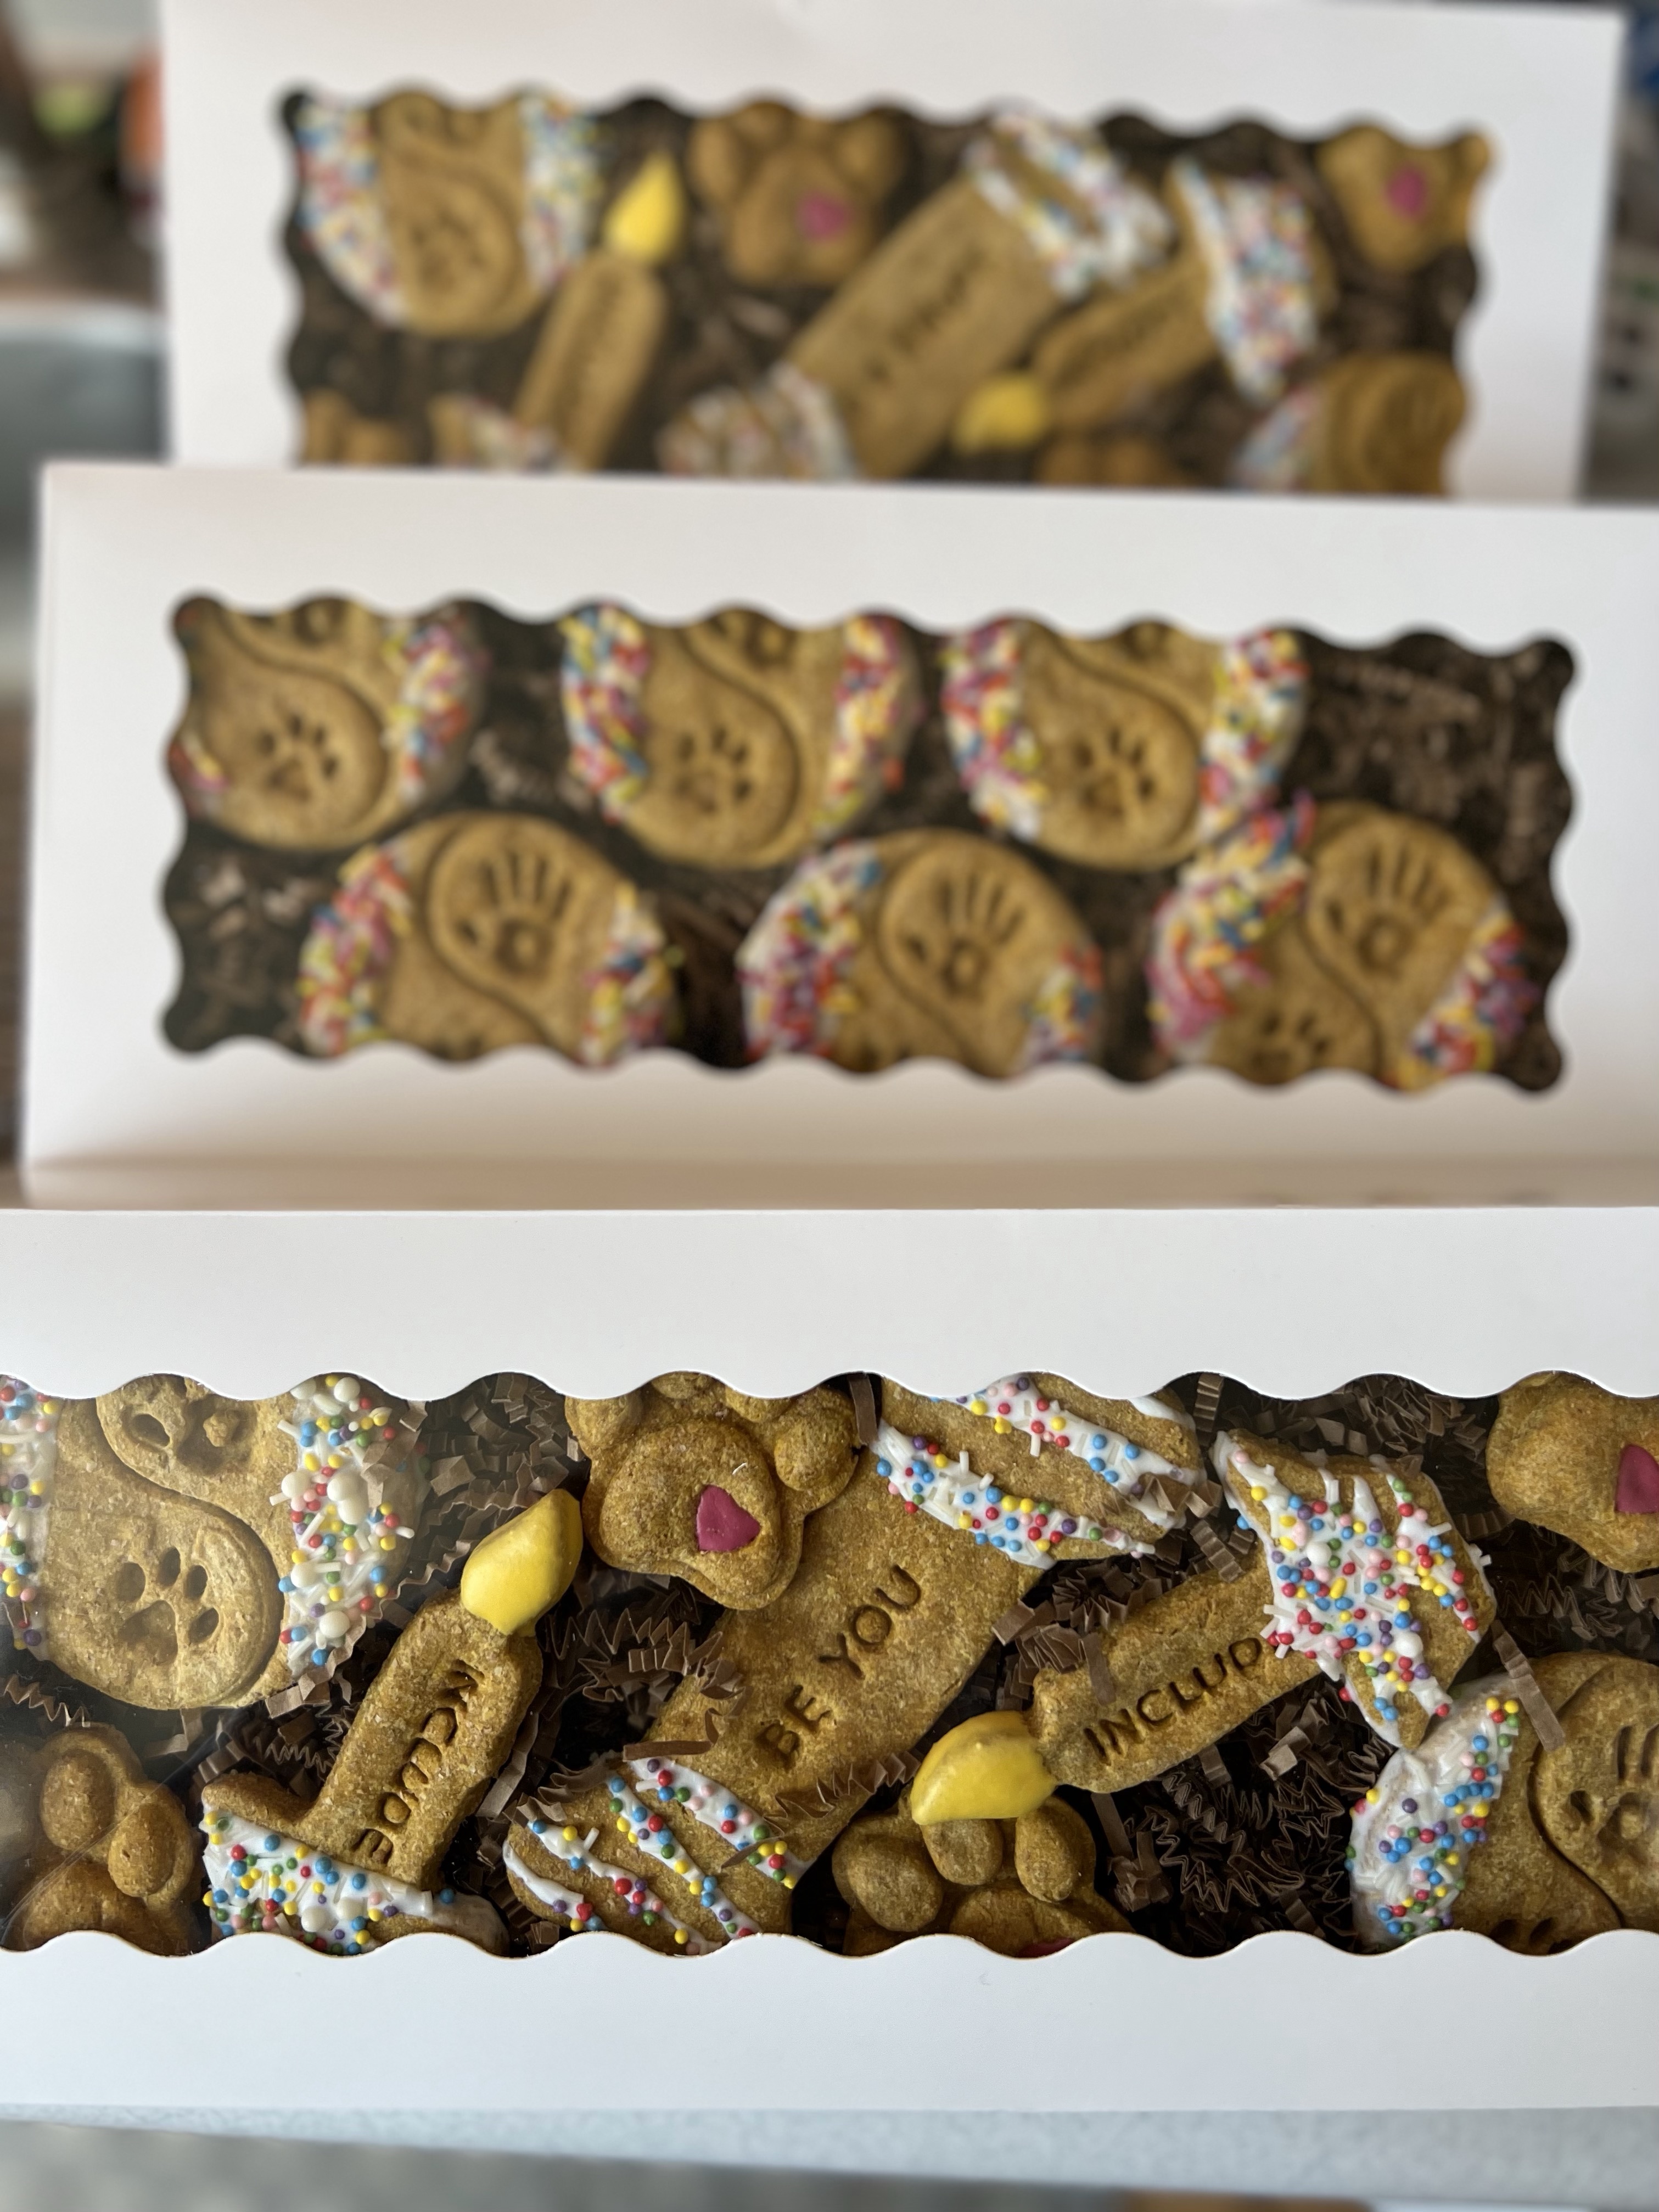 This 6 Large Gourmet Peanut Butter Gourmet Treats is made with love by Treats By William! Shop more unique gift ideas today with Spots Initiatives, the best way to support creators.